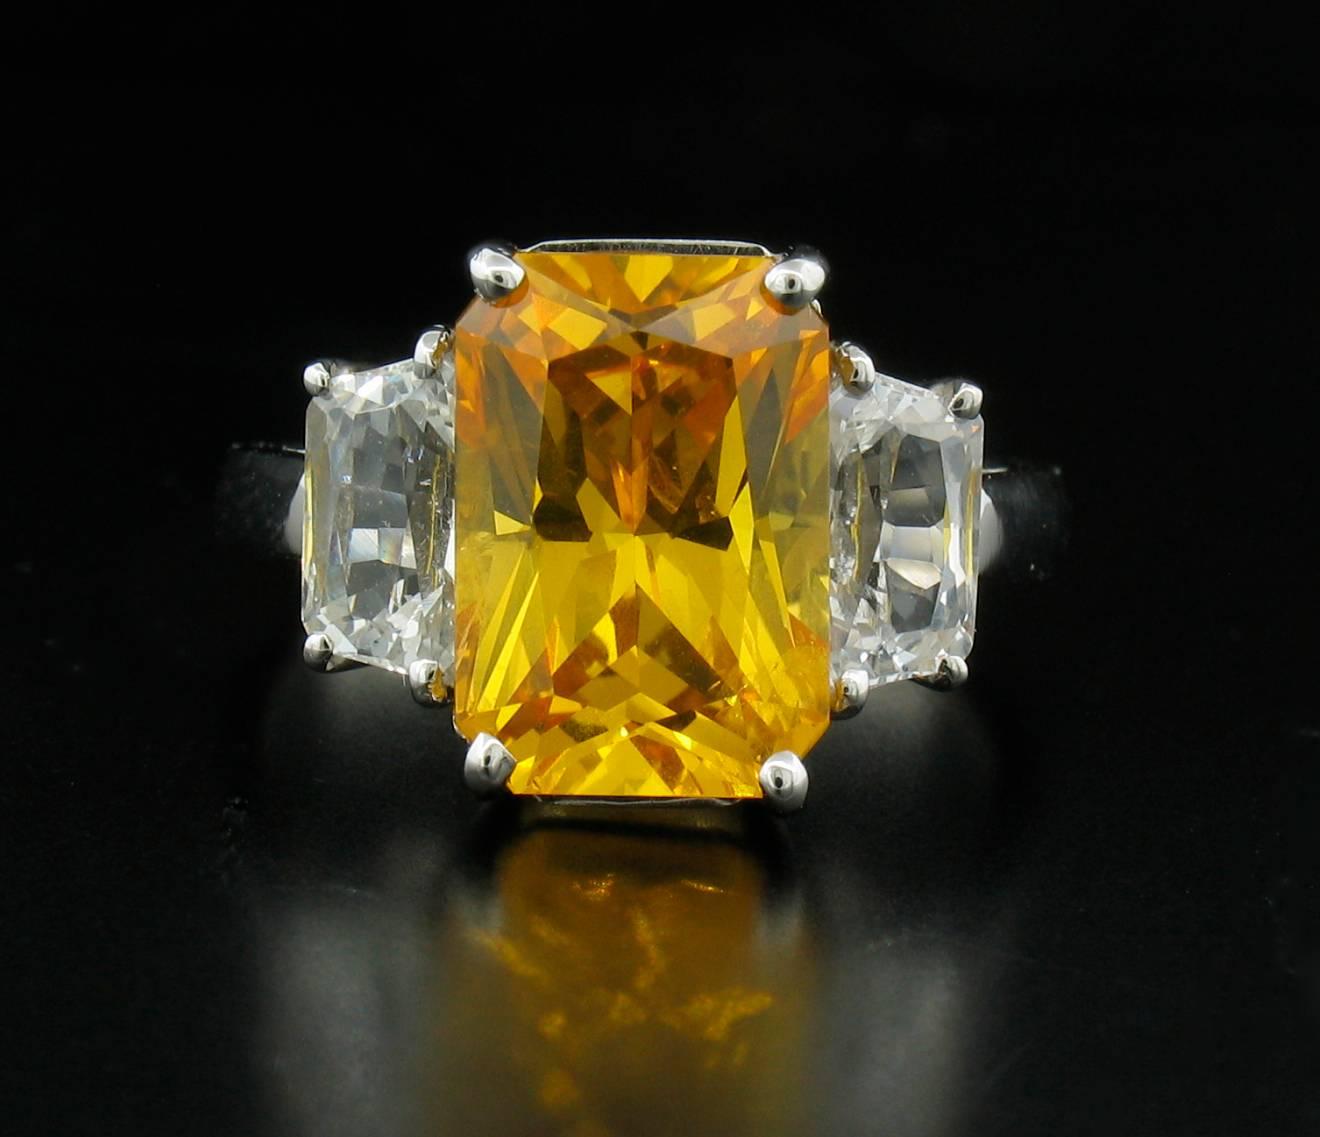 This stunning yellow sapphire weights 5.25 carats and is accented by fully faceted white sapphires weighing a total of 2.21 carats in a platinum setting. Size 6. 